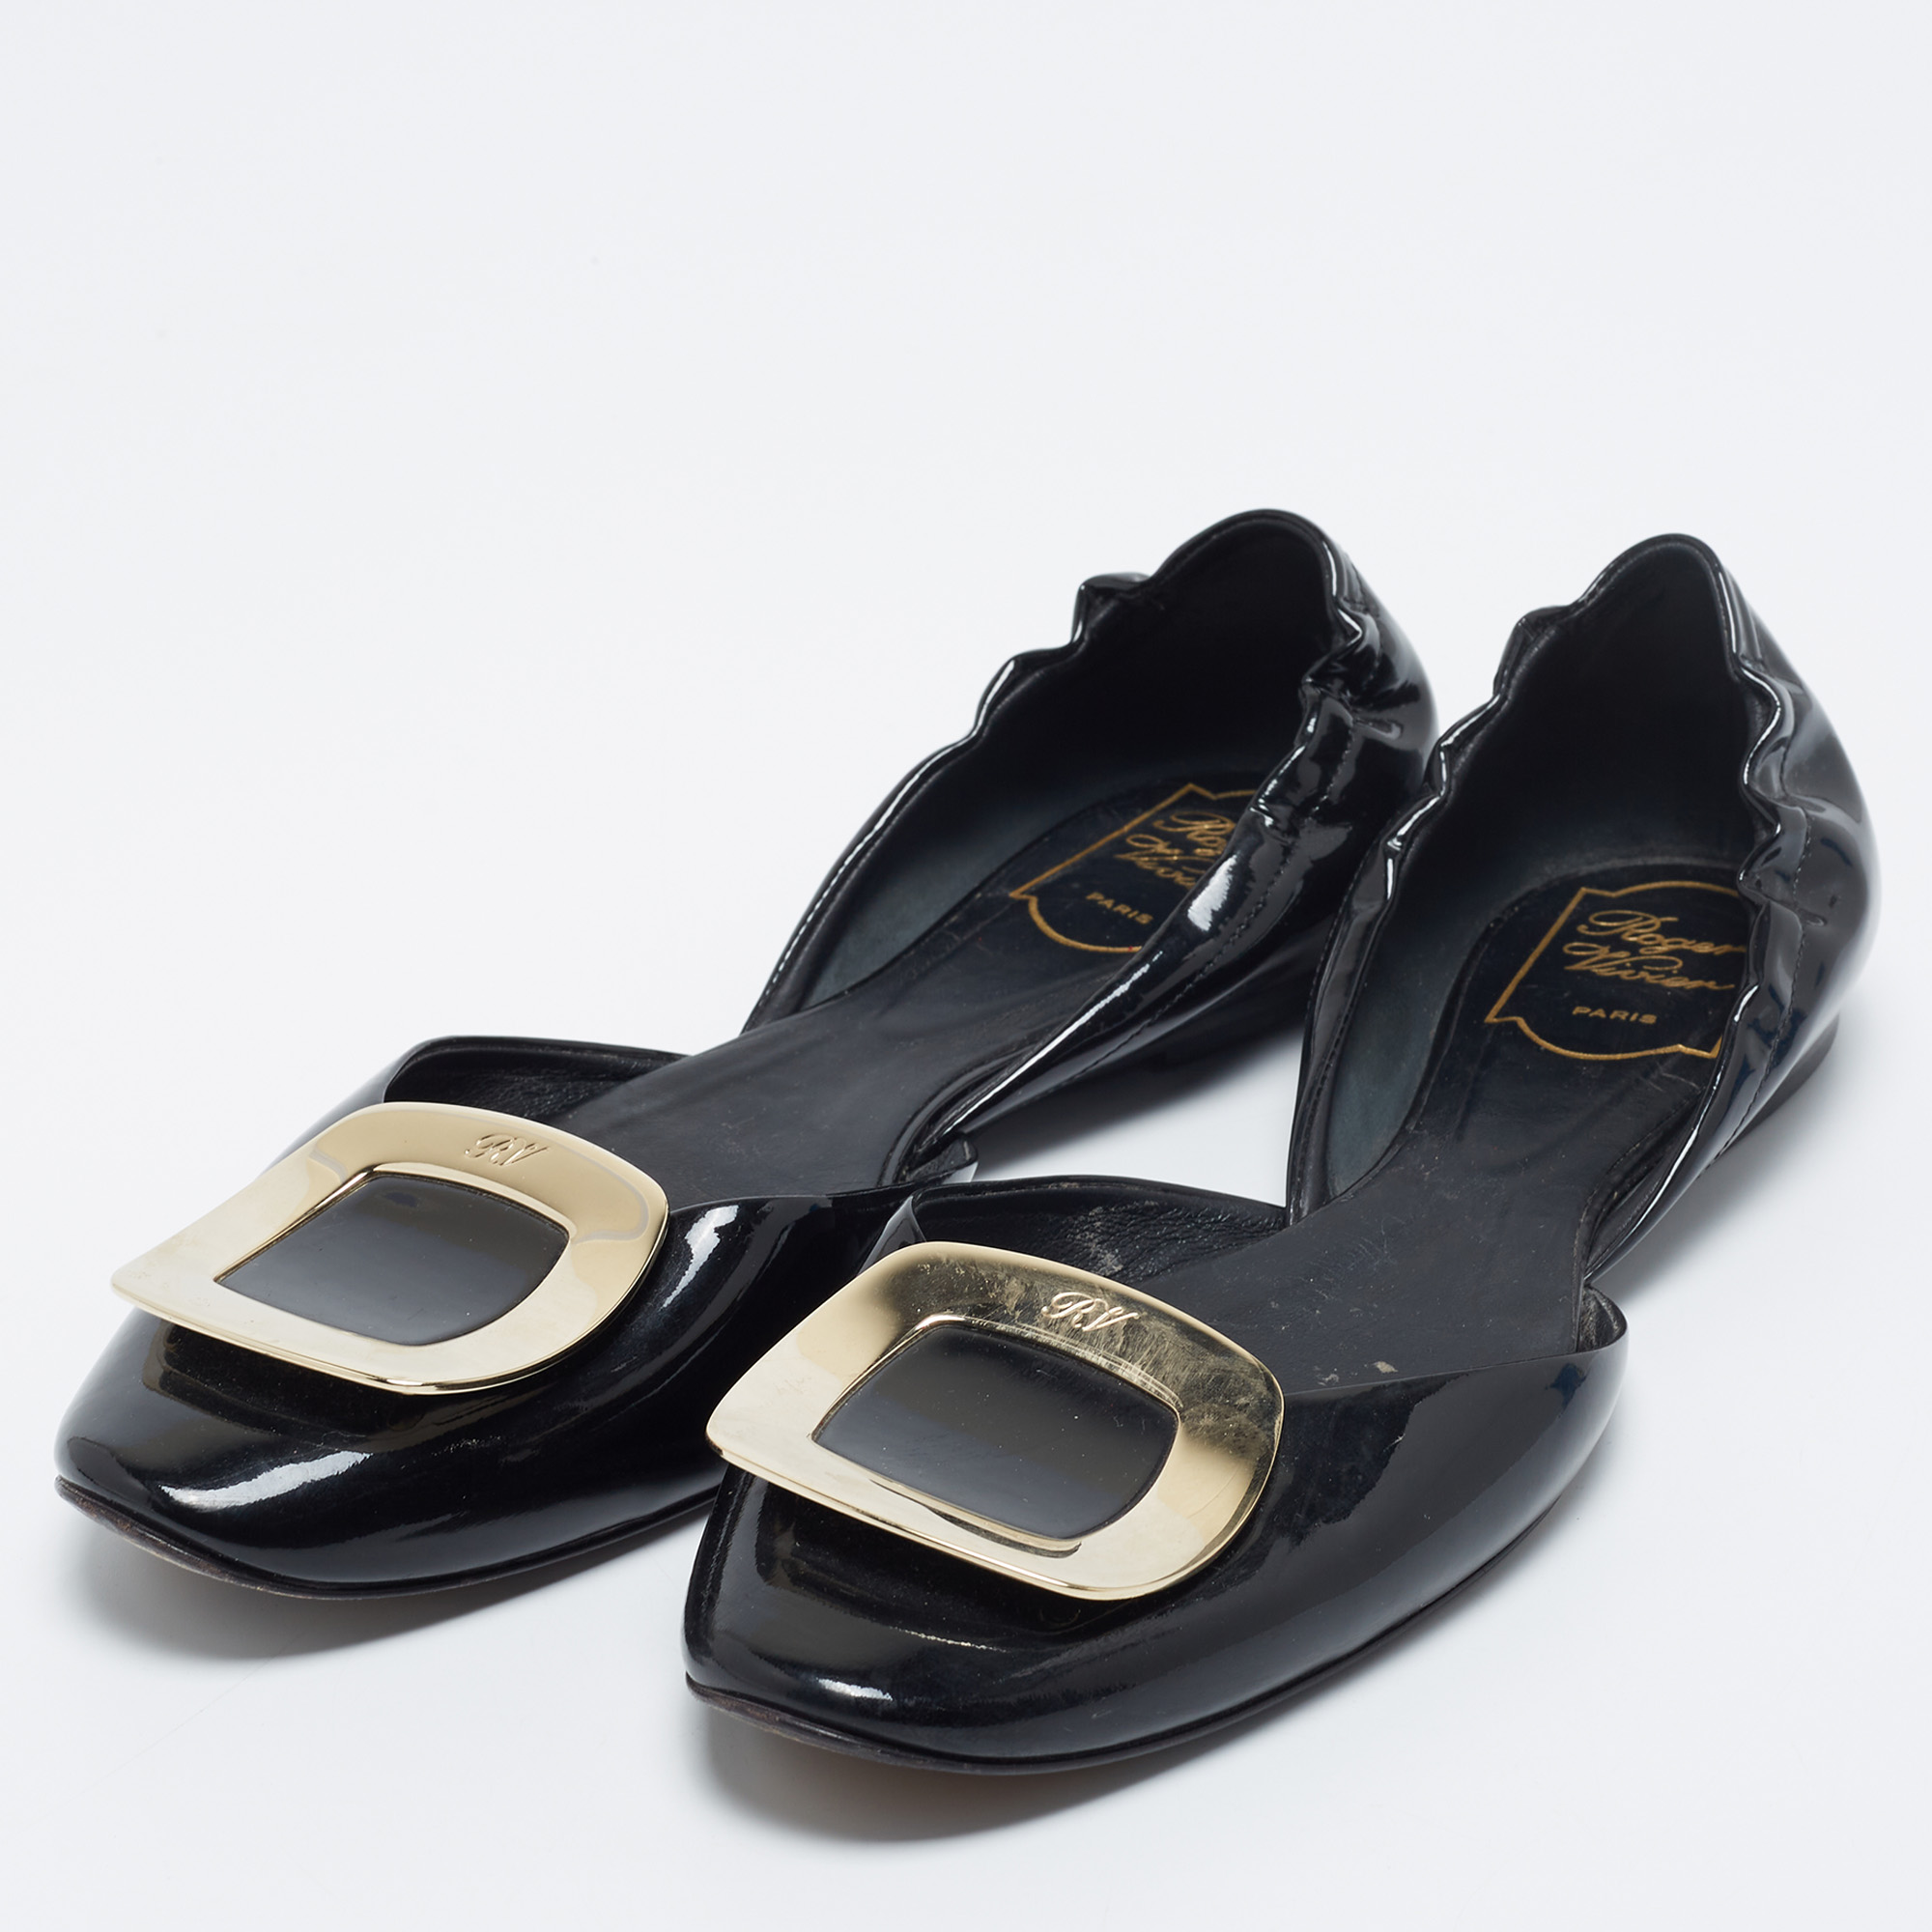 

Roger Vivier Black Patent Leather Chips D'Orsay Buckle Flats Size